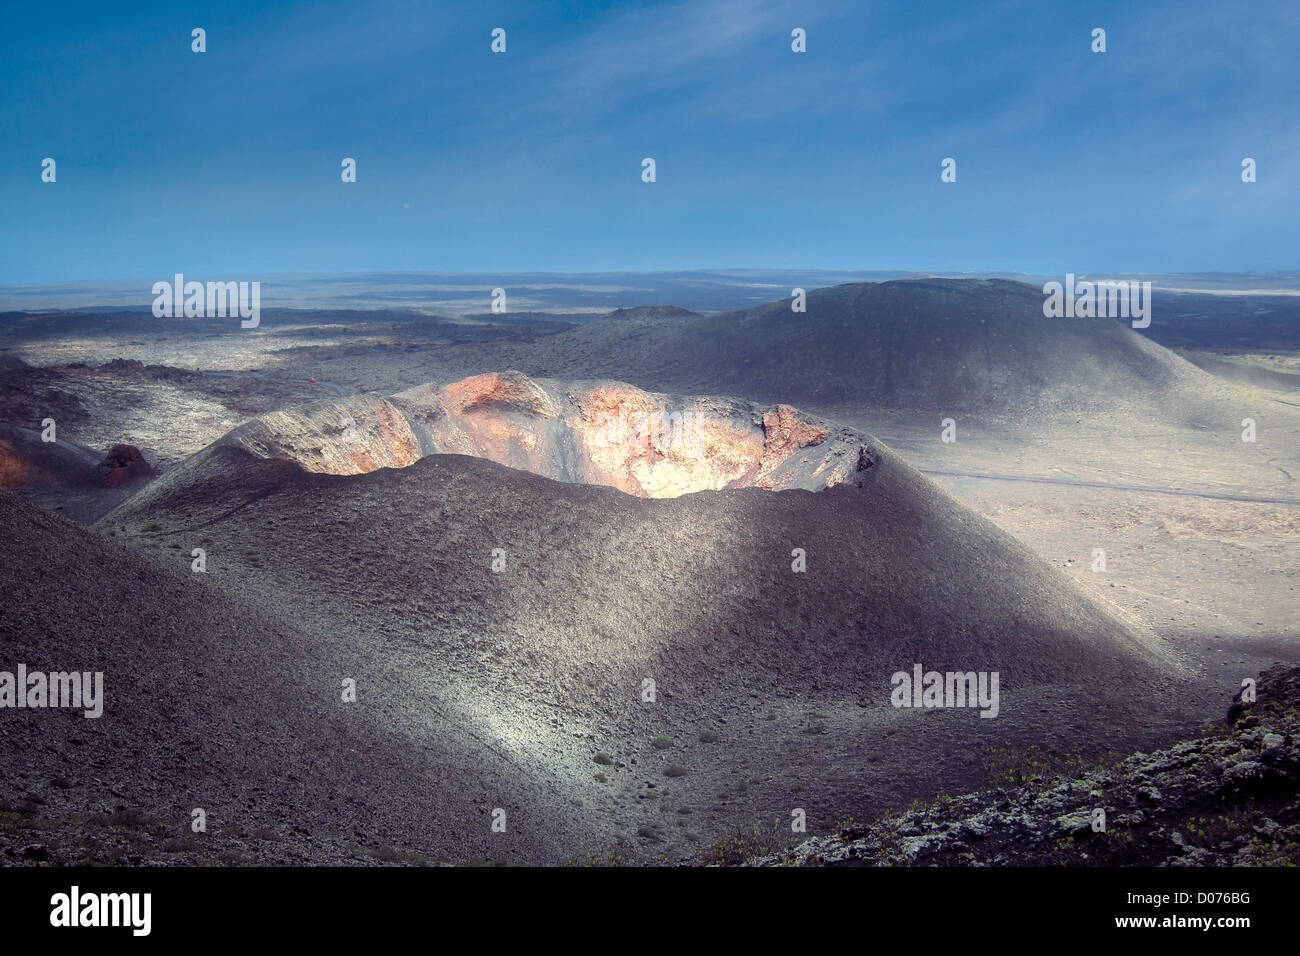 The volcanic landscape of Timanfaya National Park in Lanzarote, the Canary Islands Stock Photo